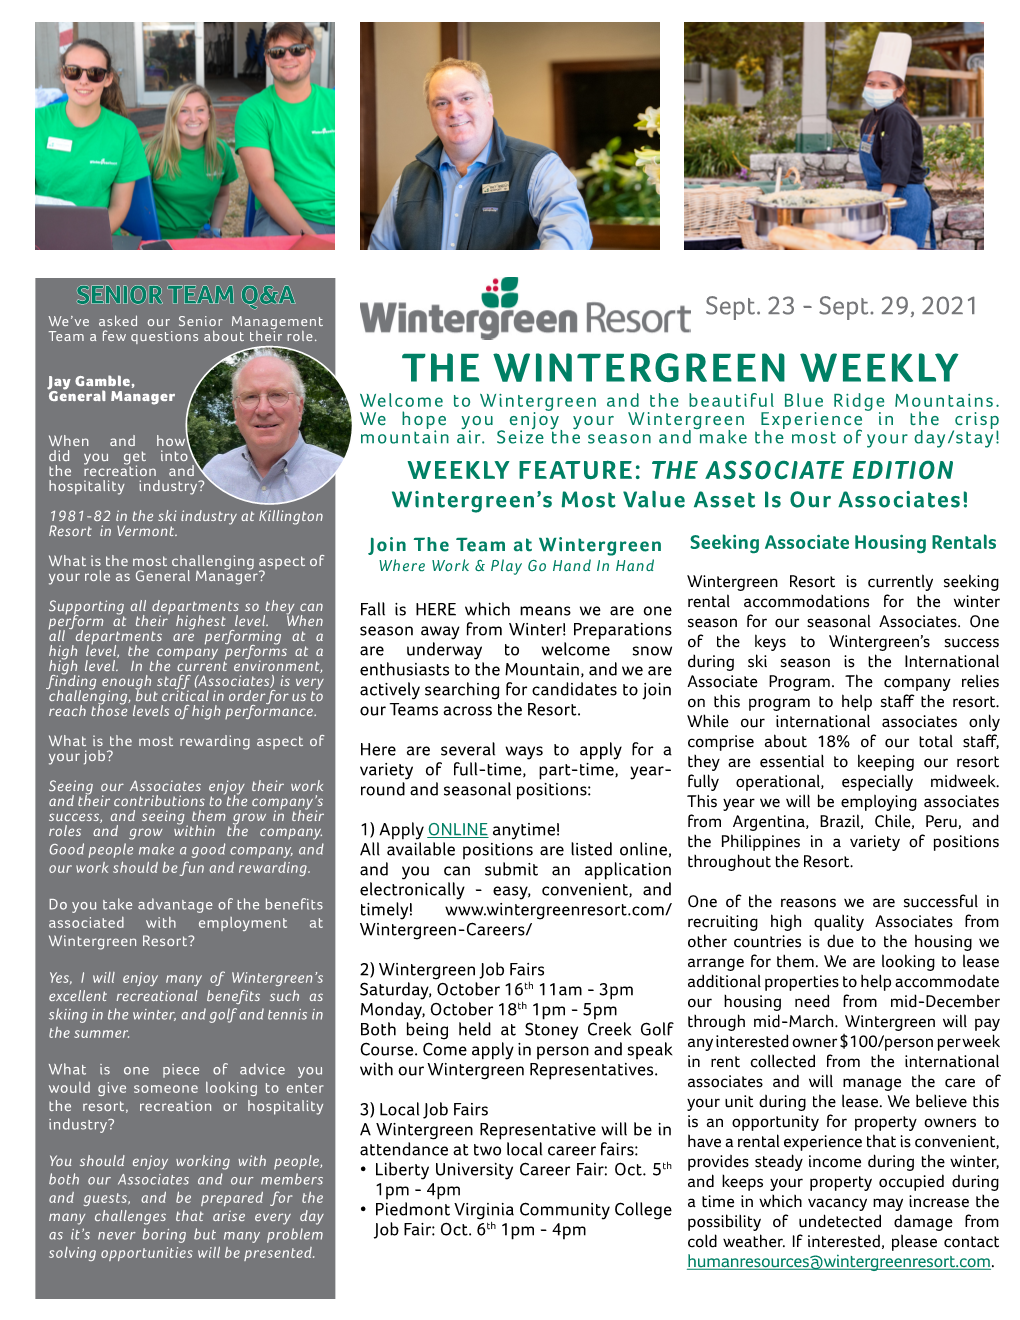 THE WINTERGREEN WEEKLY General Manager Welcome to Wintergreen and the Beautiful Blue Ridge Mountains